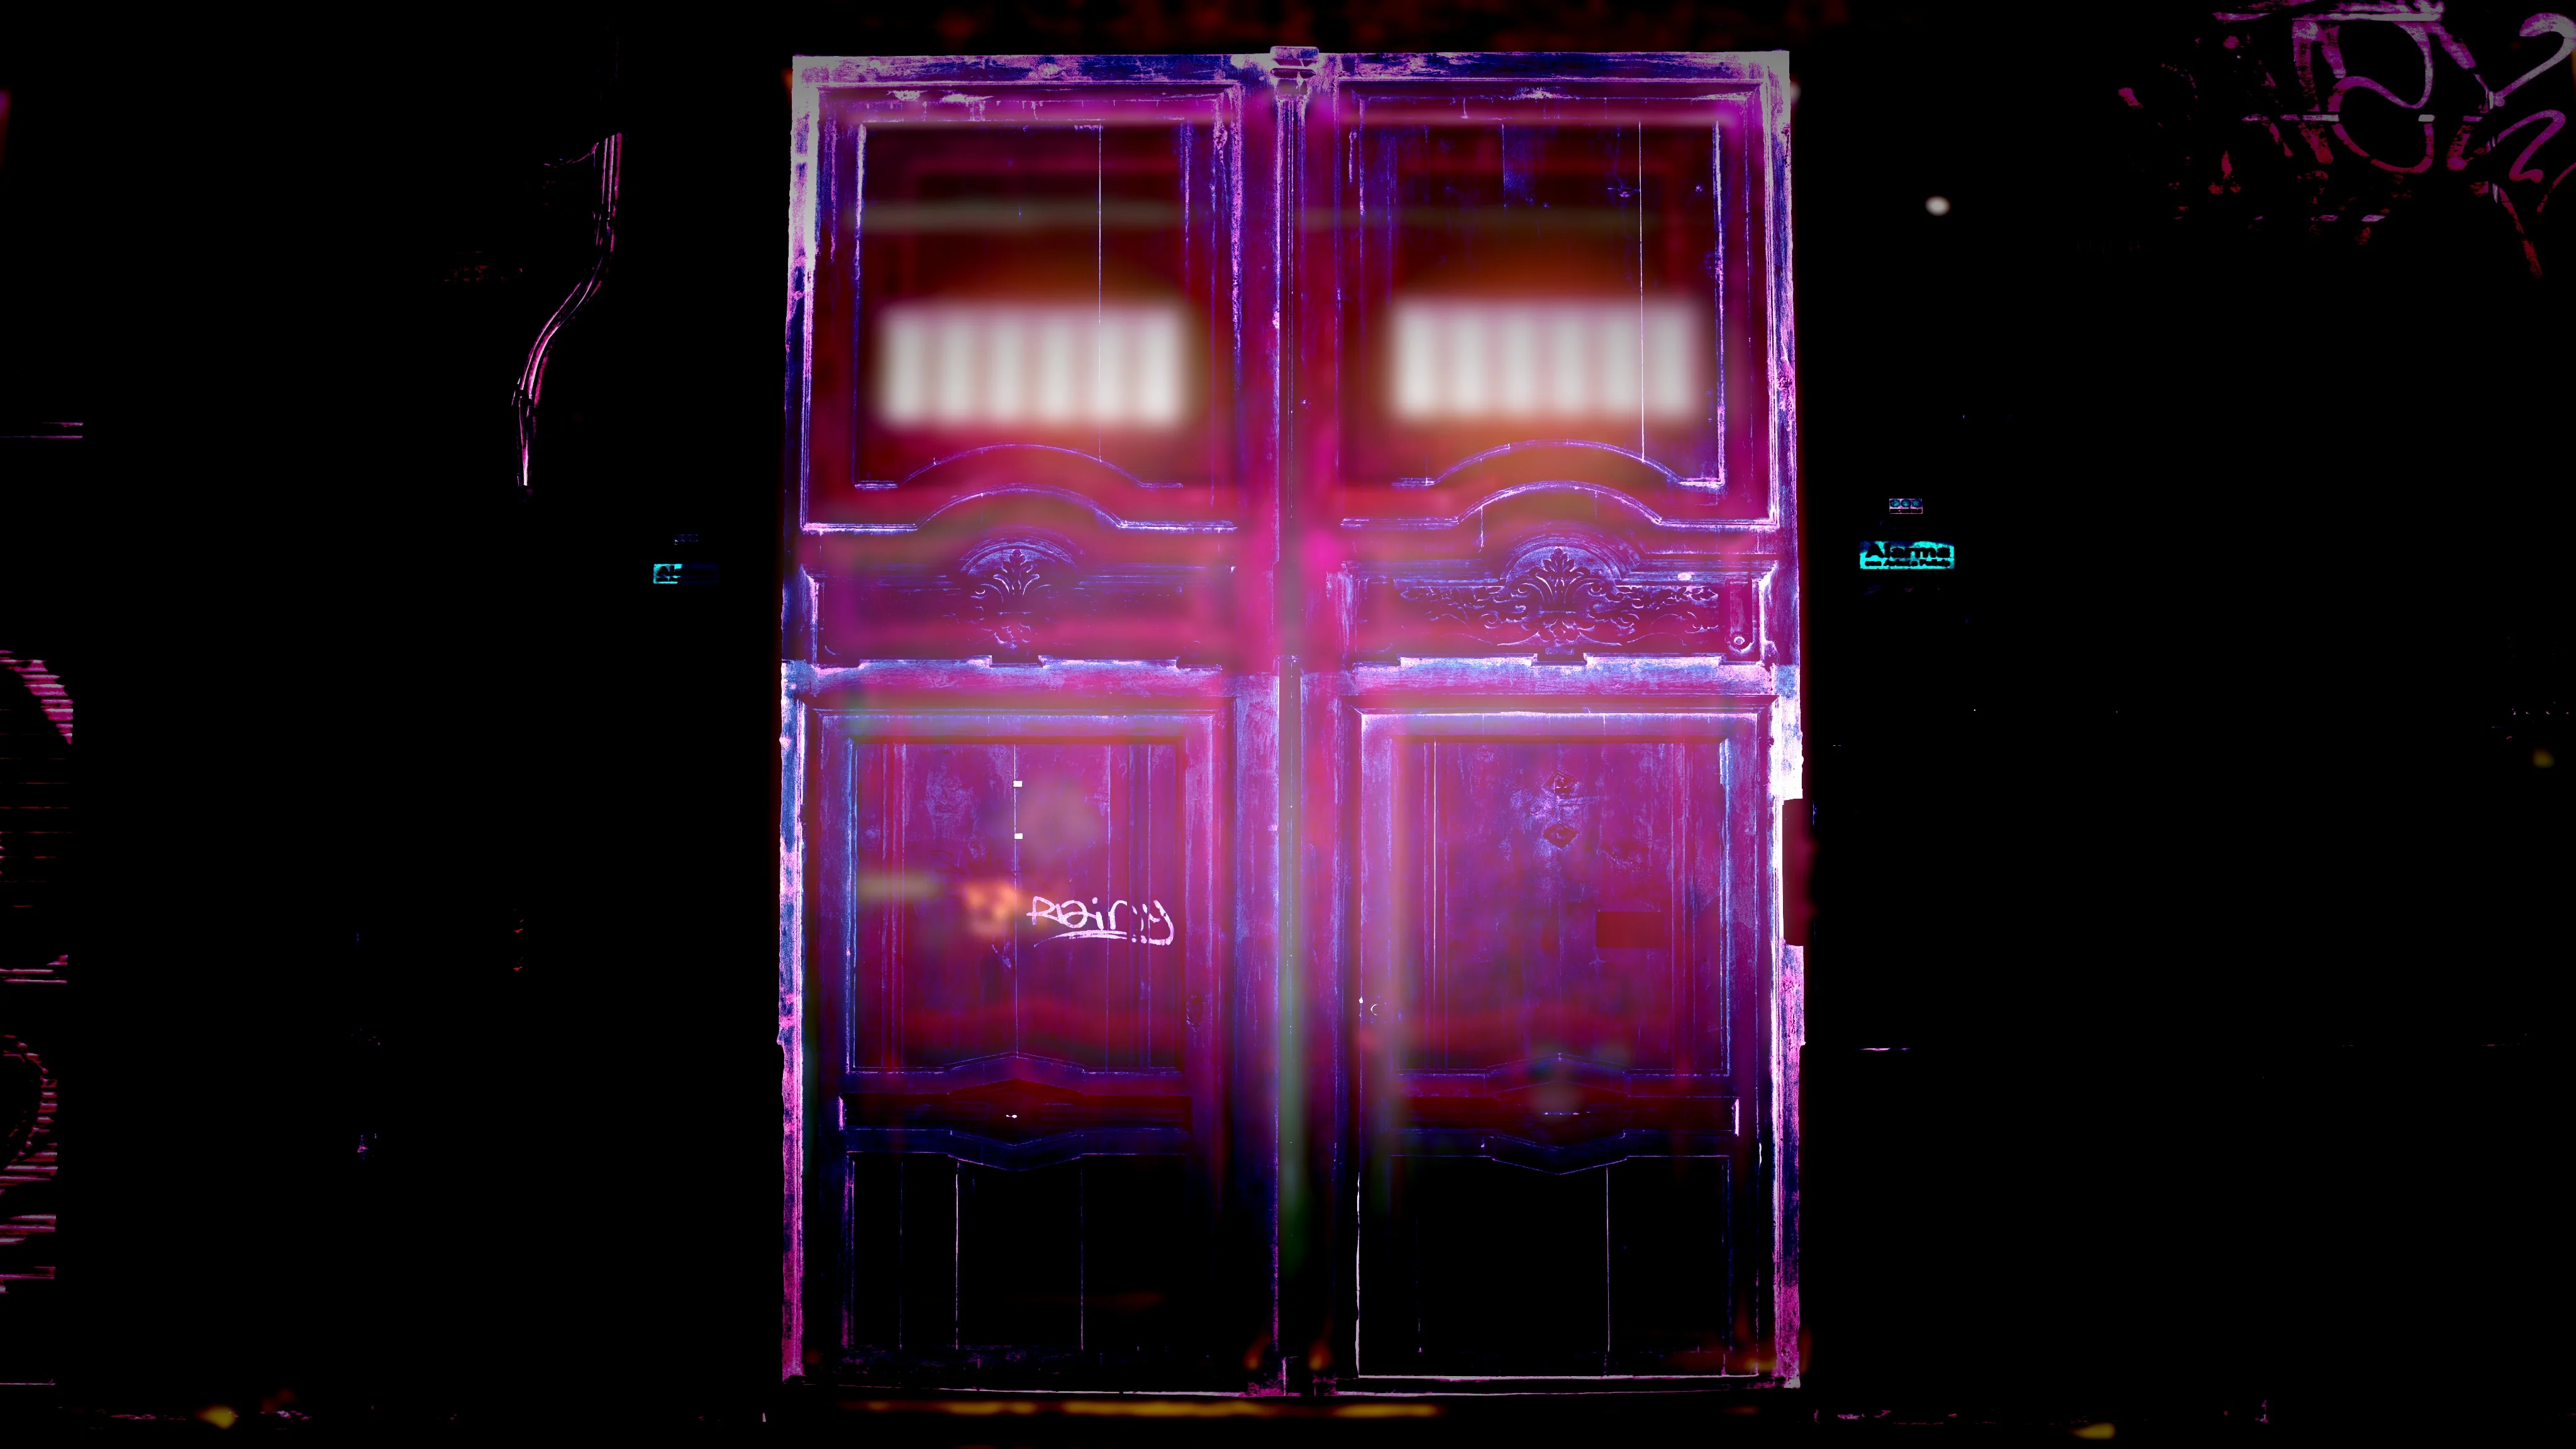 Glitch From doors